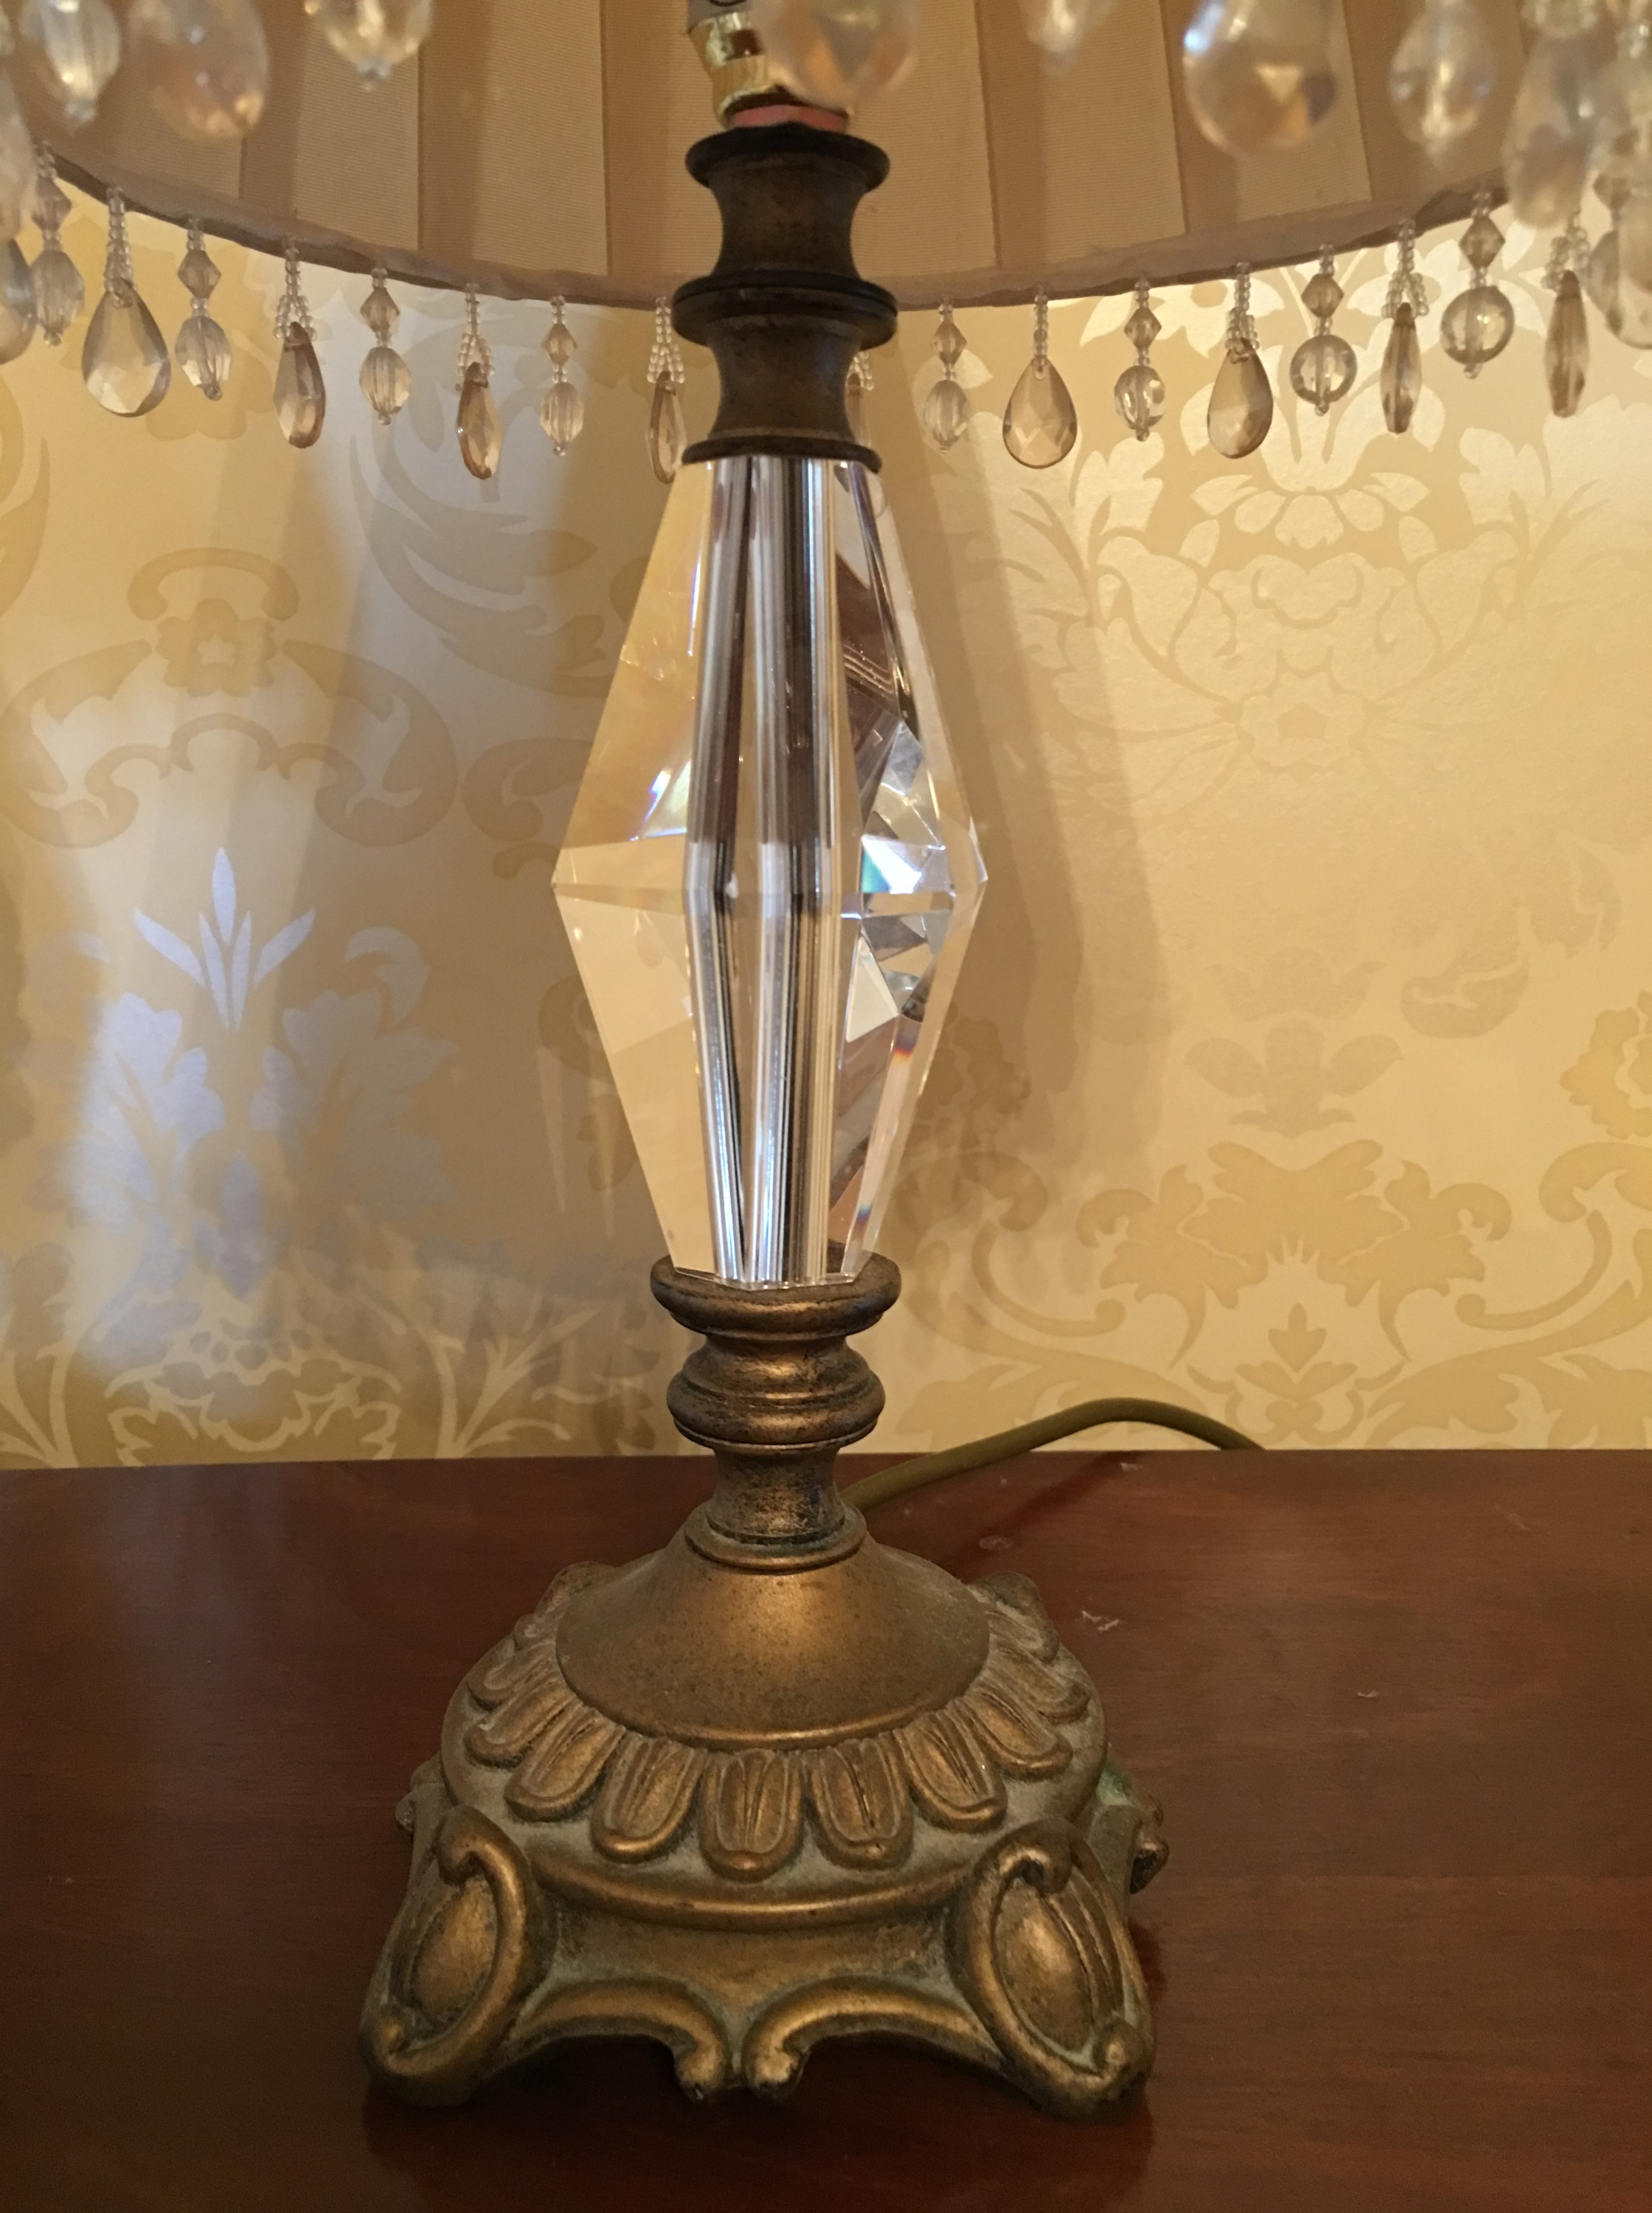 A pair of gilt-mounted cut-glass table lamps - Image 2 of 2